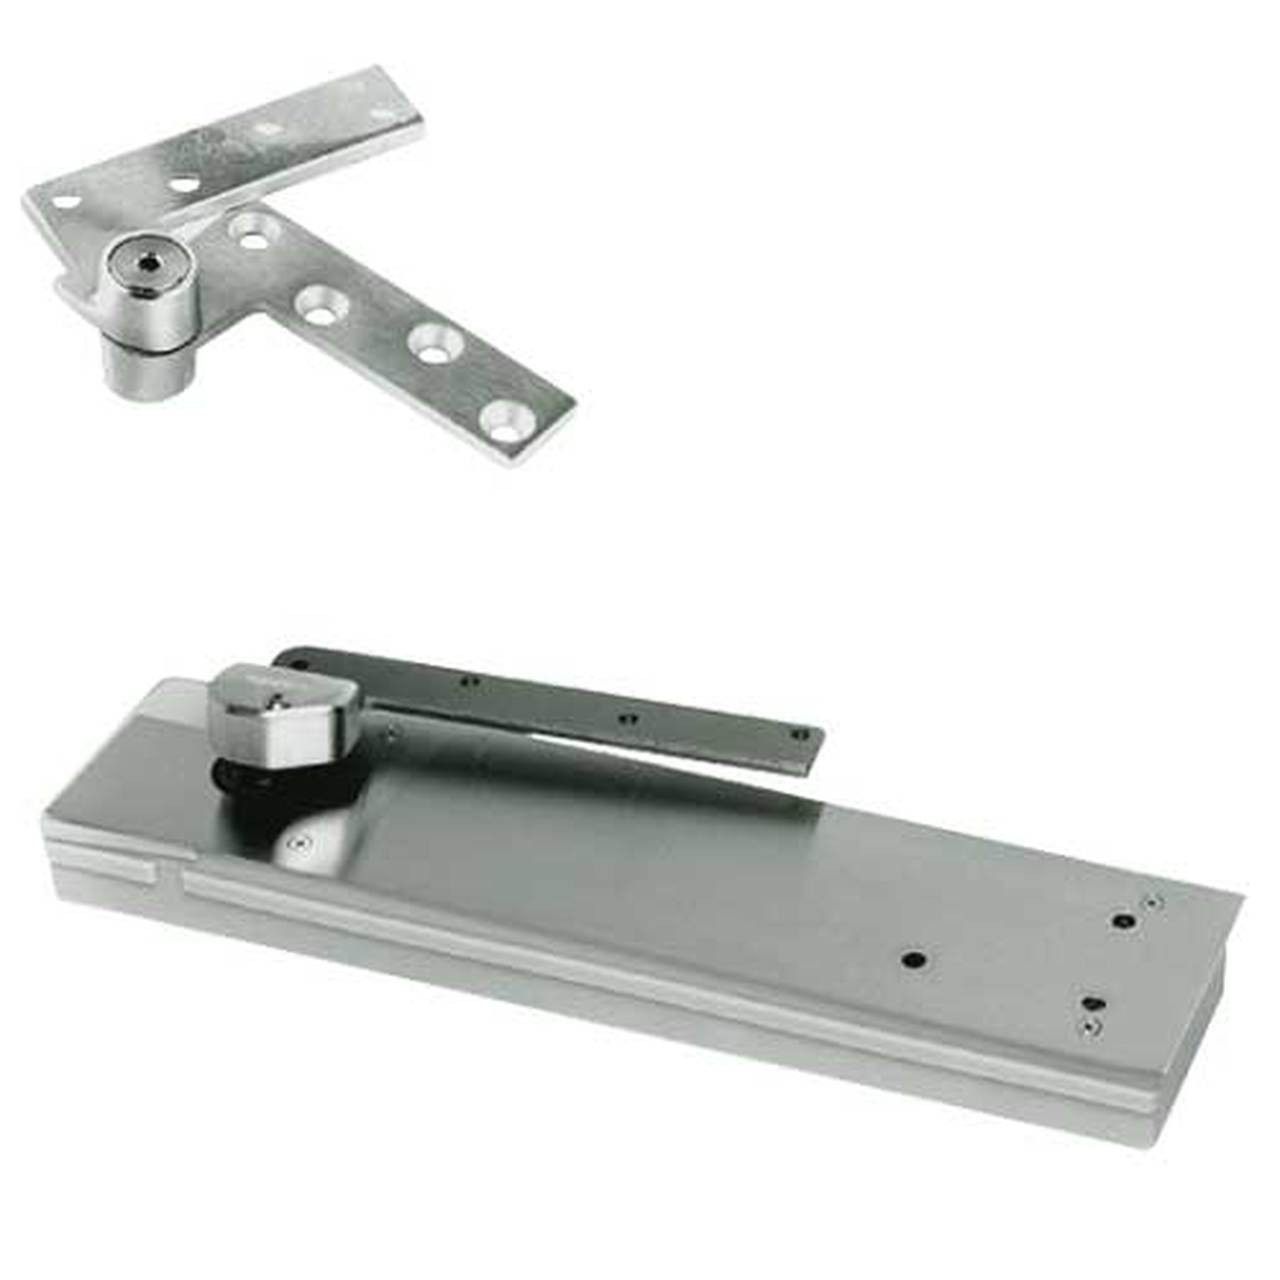 FHM5104NBC-LFP-LH-619 Rixson HM51 Series 3/4" Offset Hung Shallow Depth Floor Closers in Satin Nickel Finish